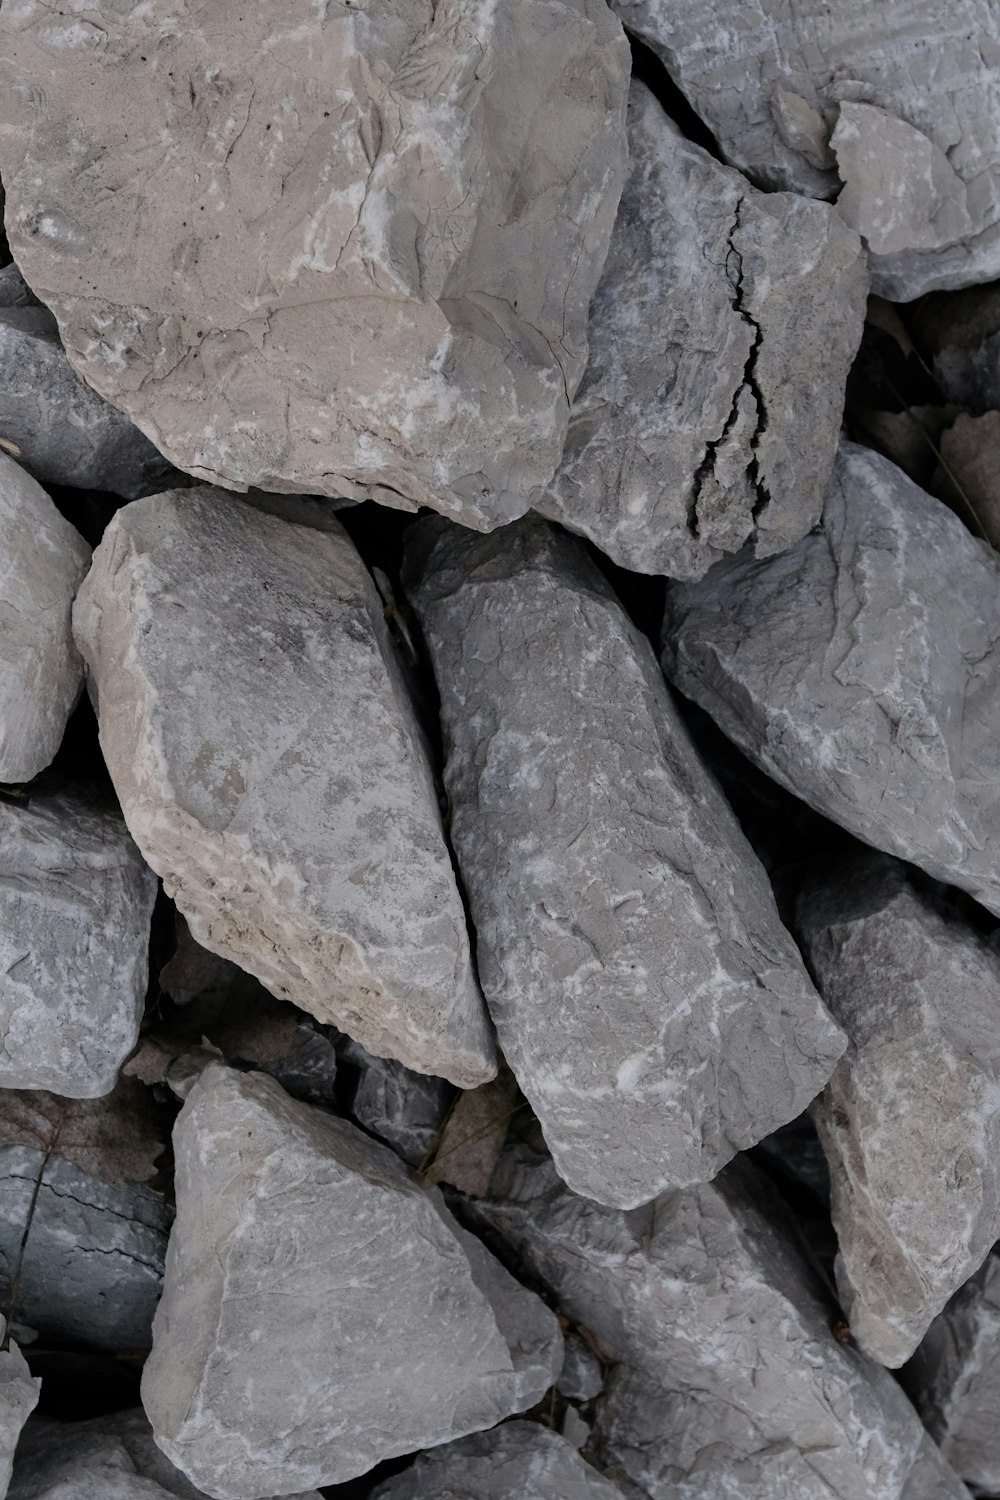 a group of rocks